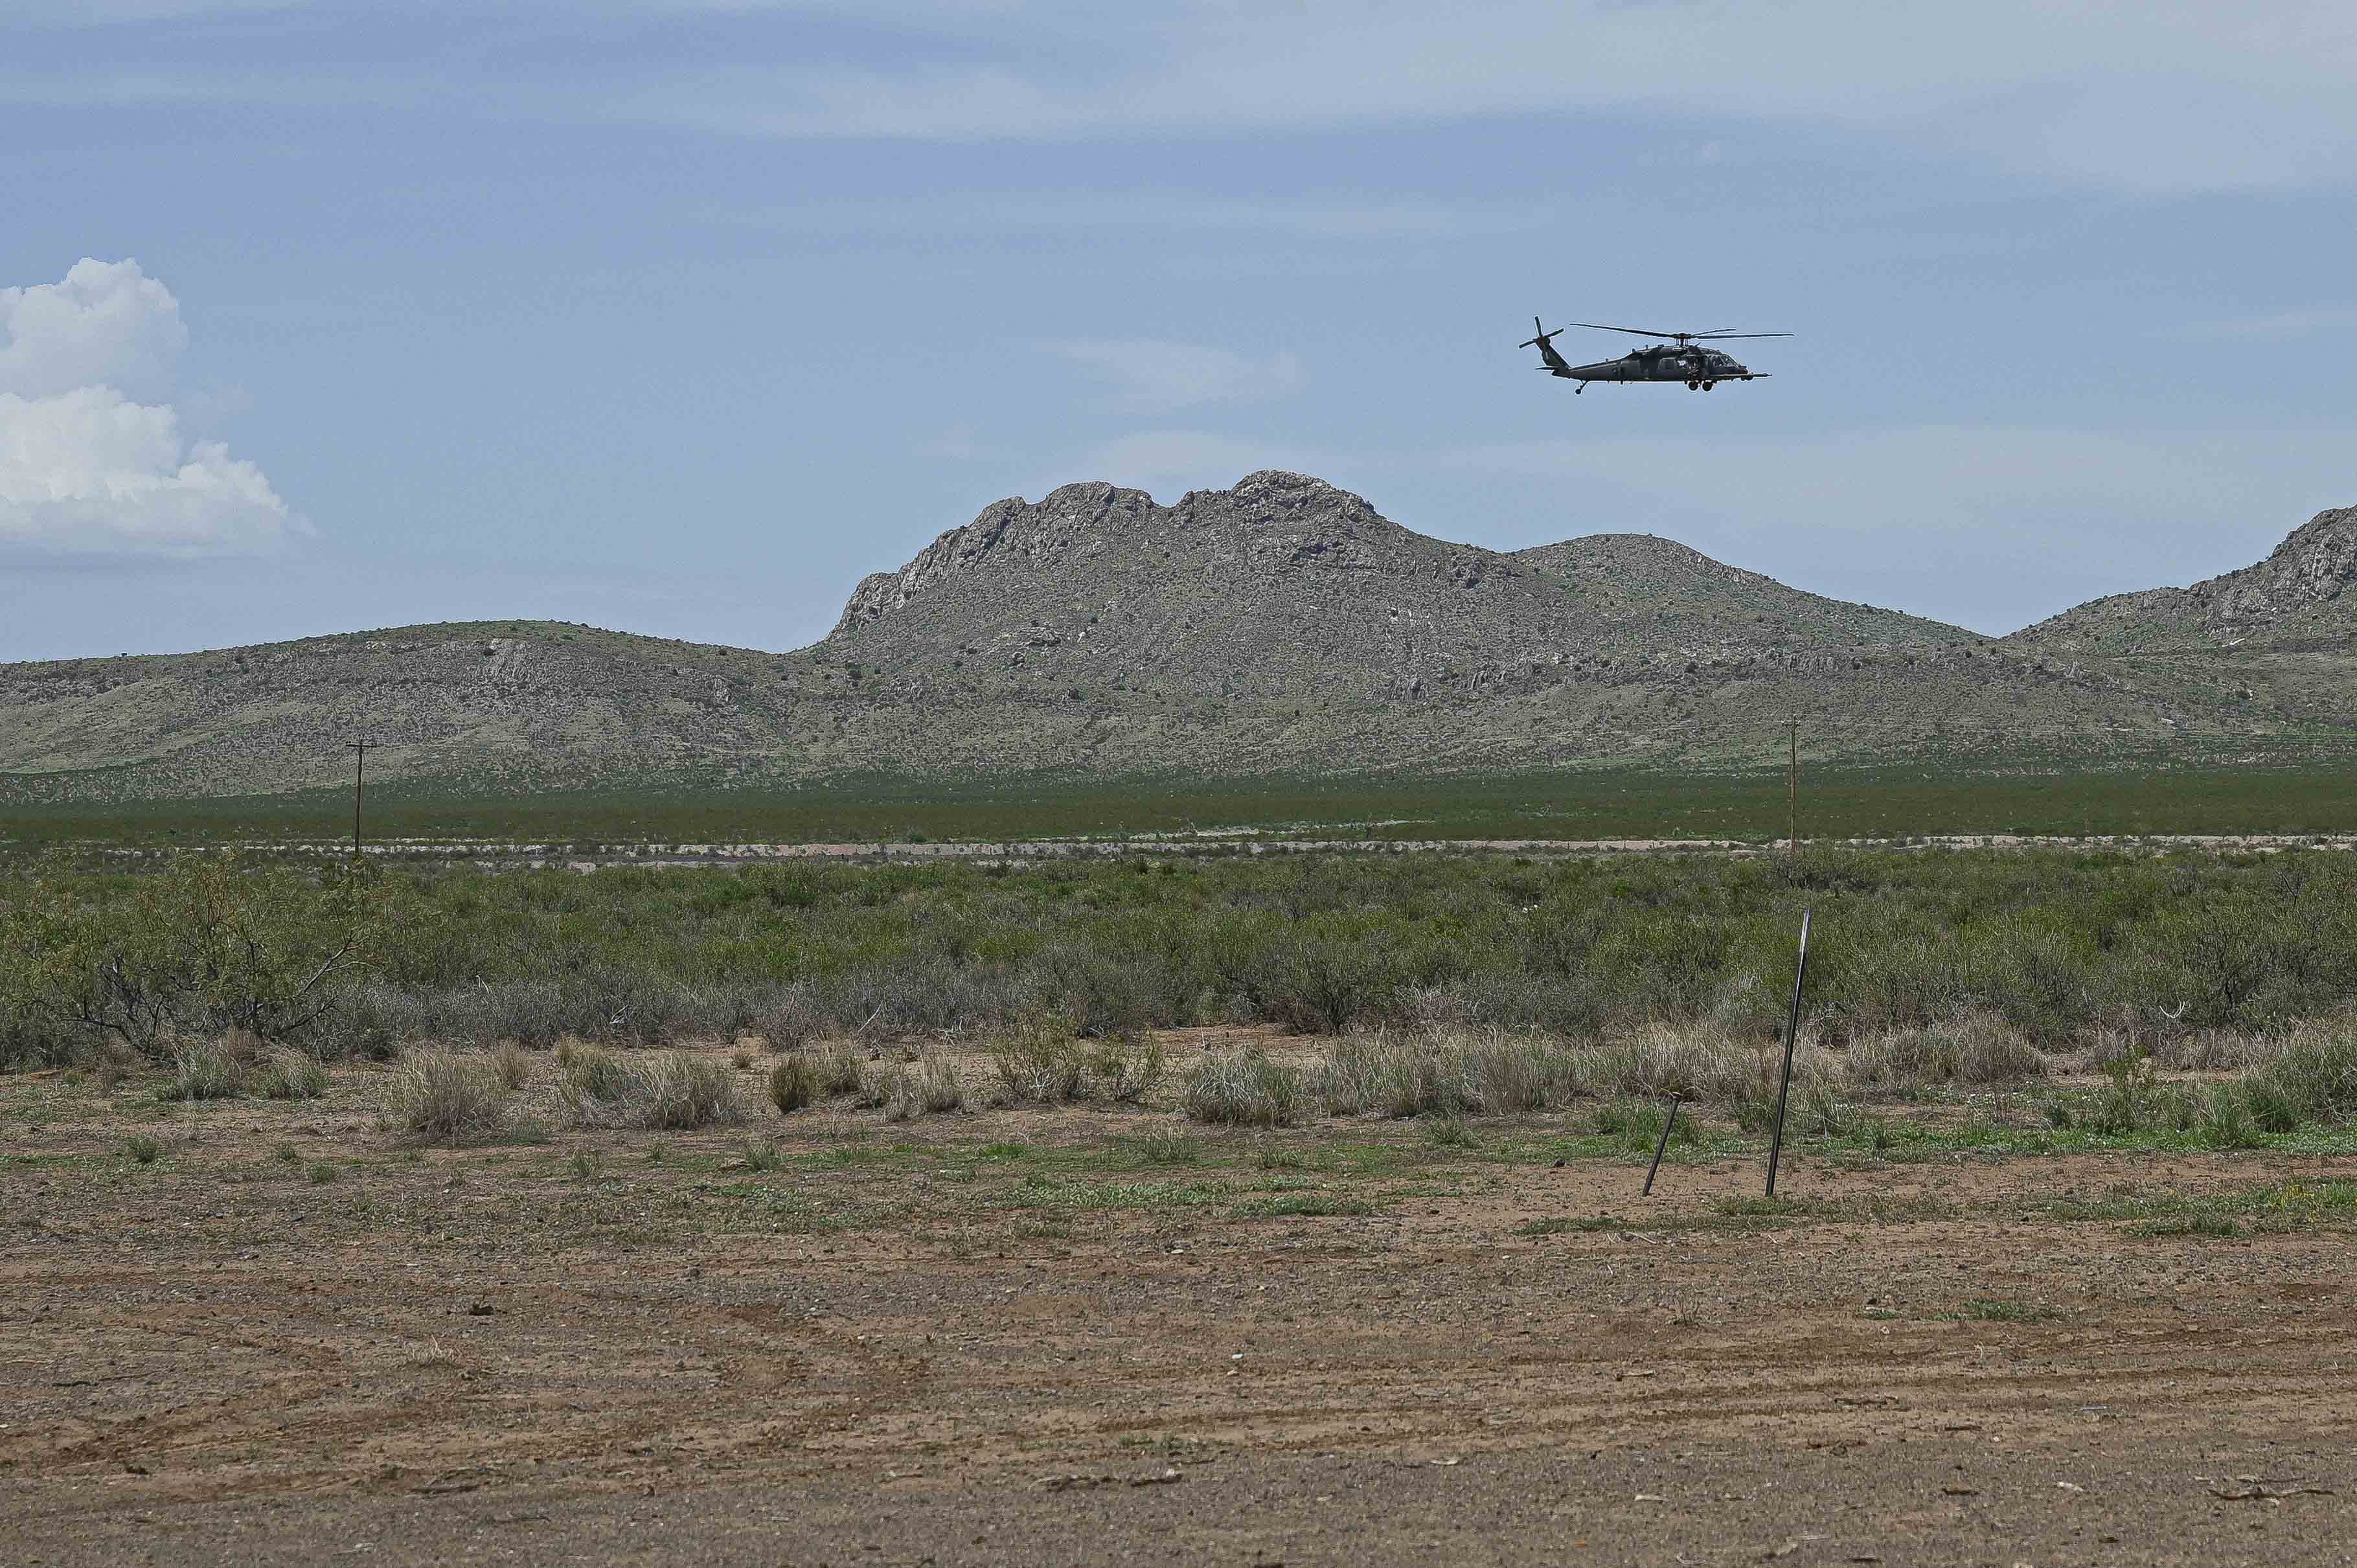 Image shows a helicopter flying over the desert.